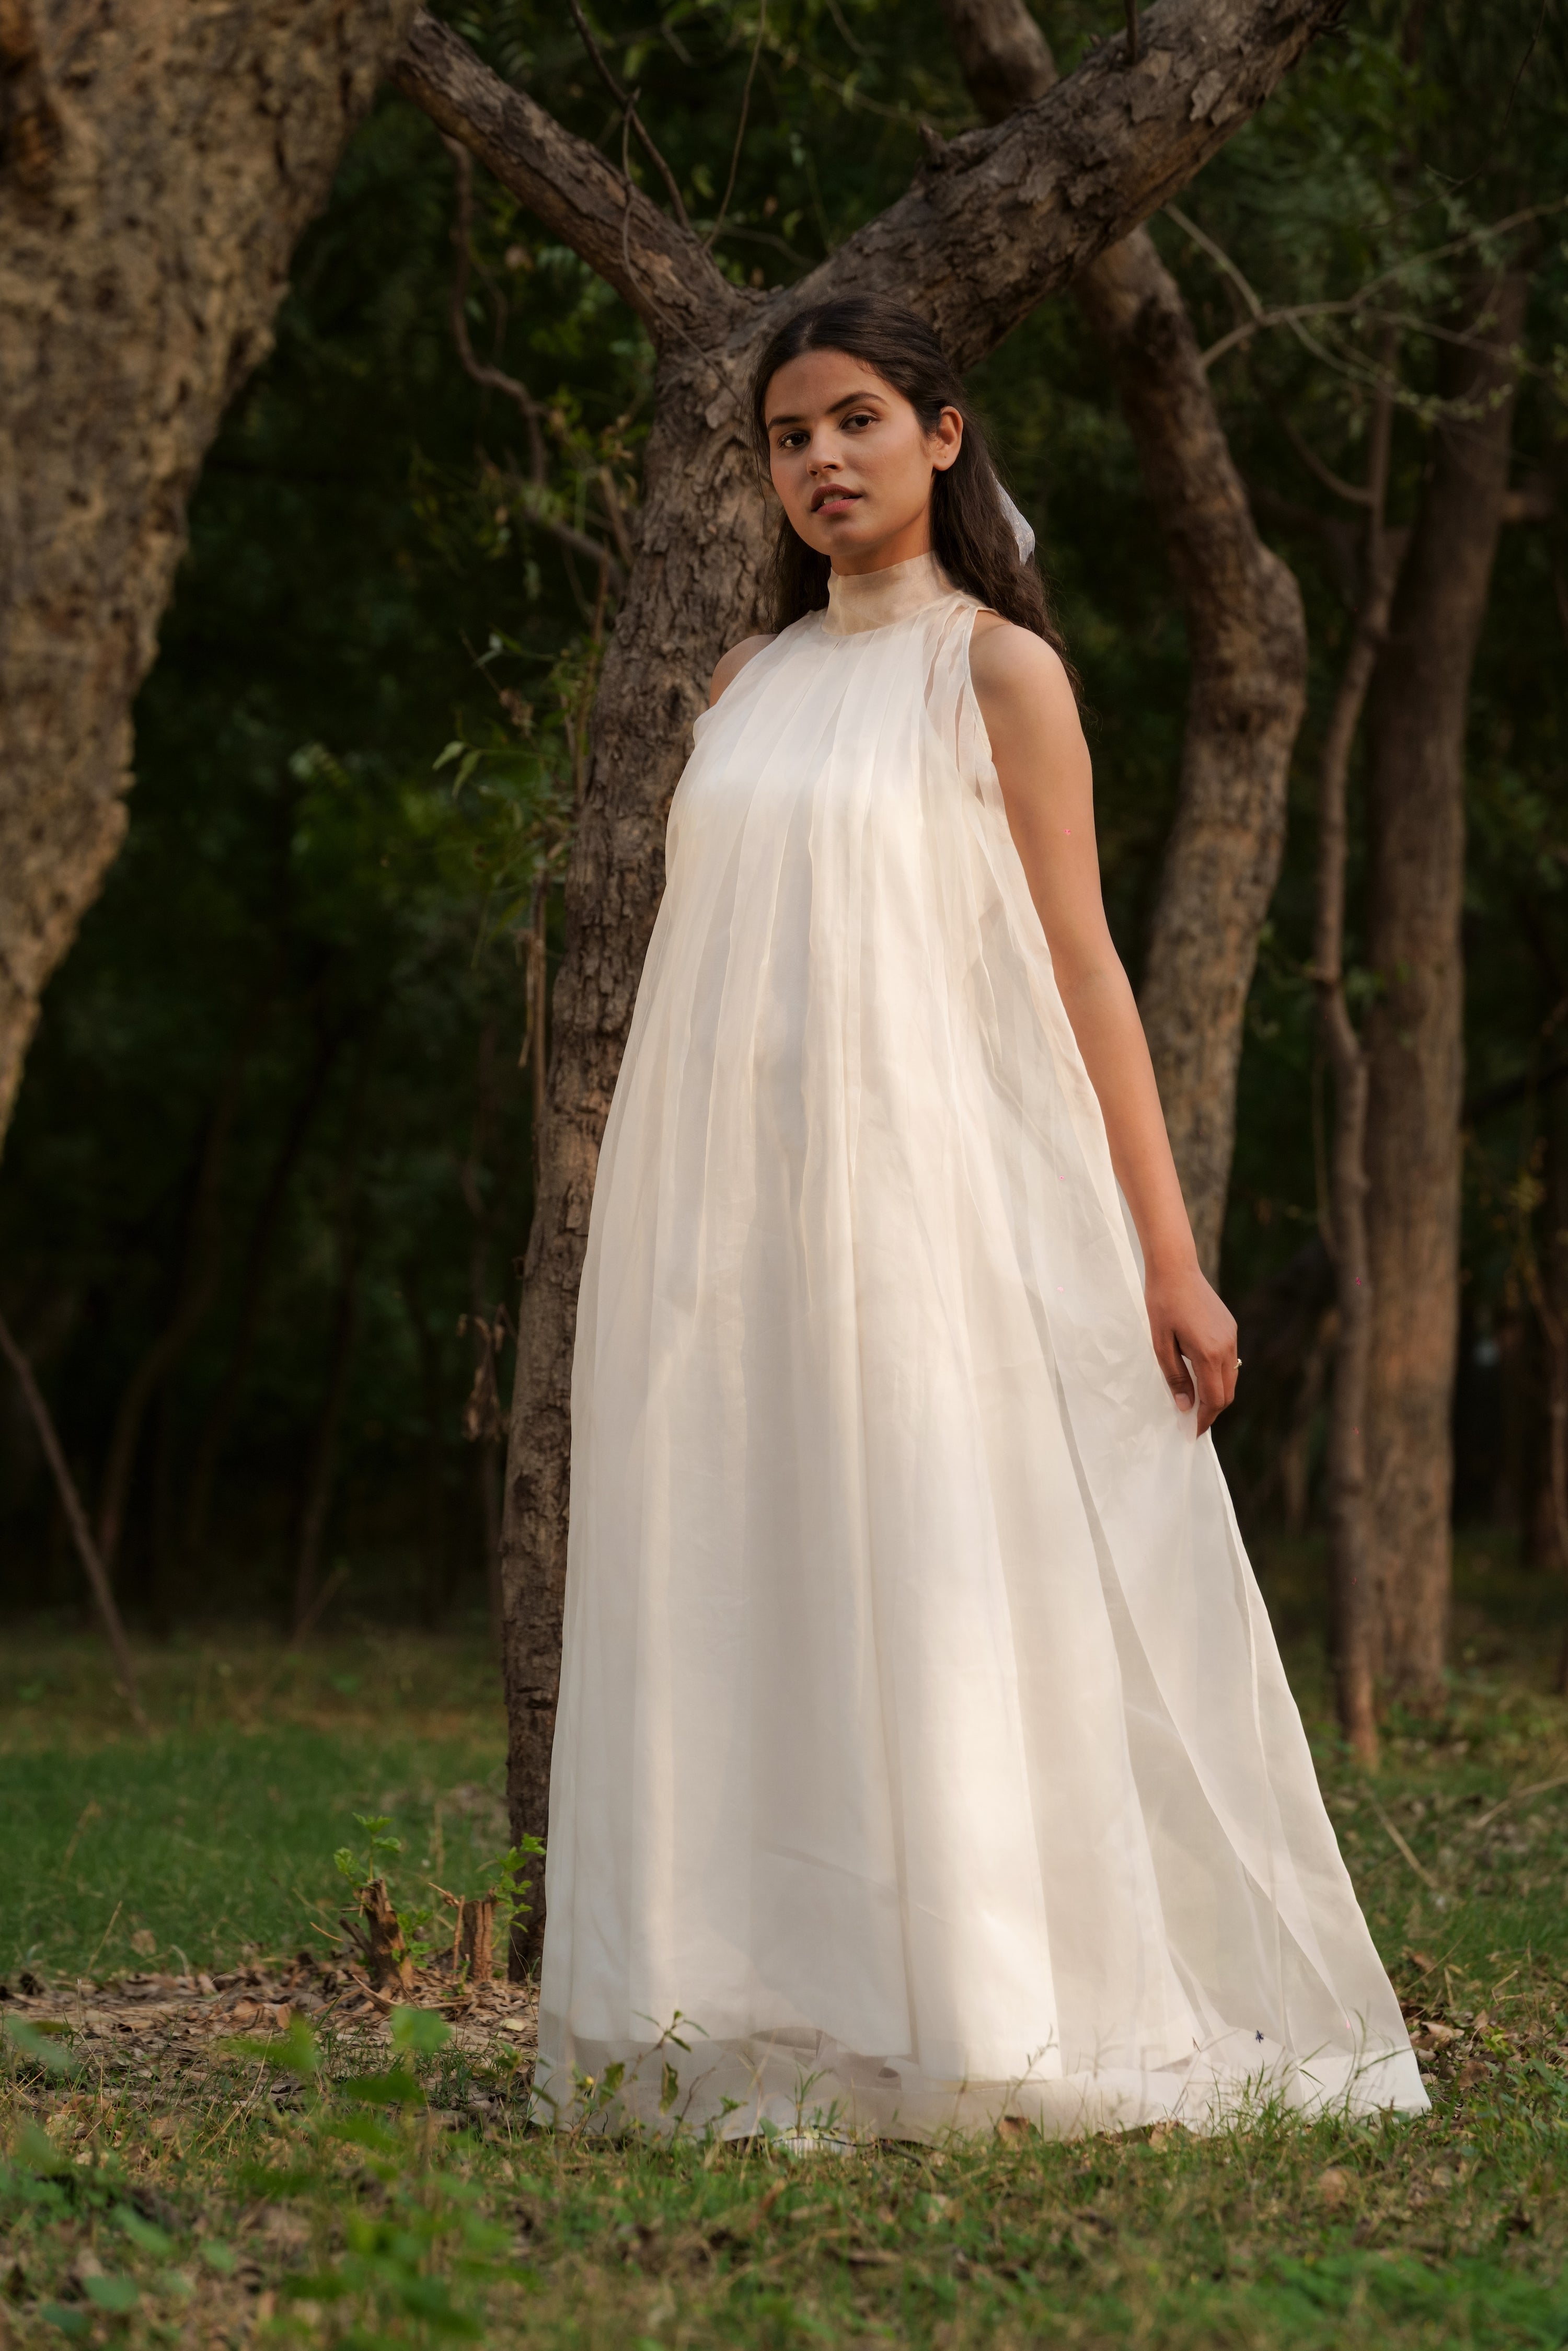 Ethnic Gowns | Silk Organza Gown | Freeup